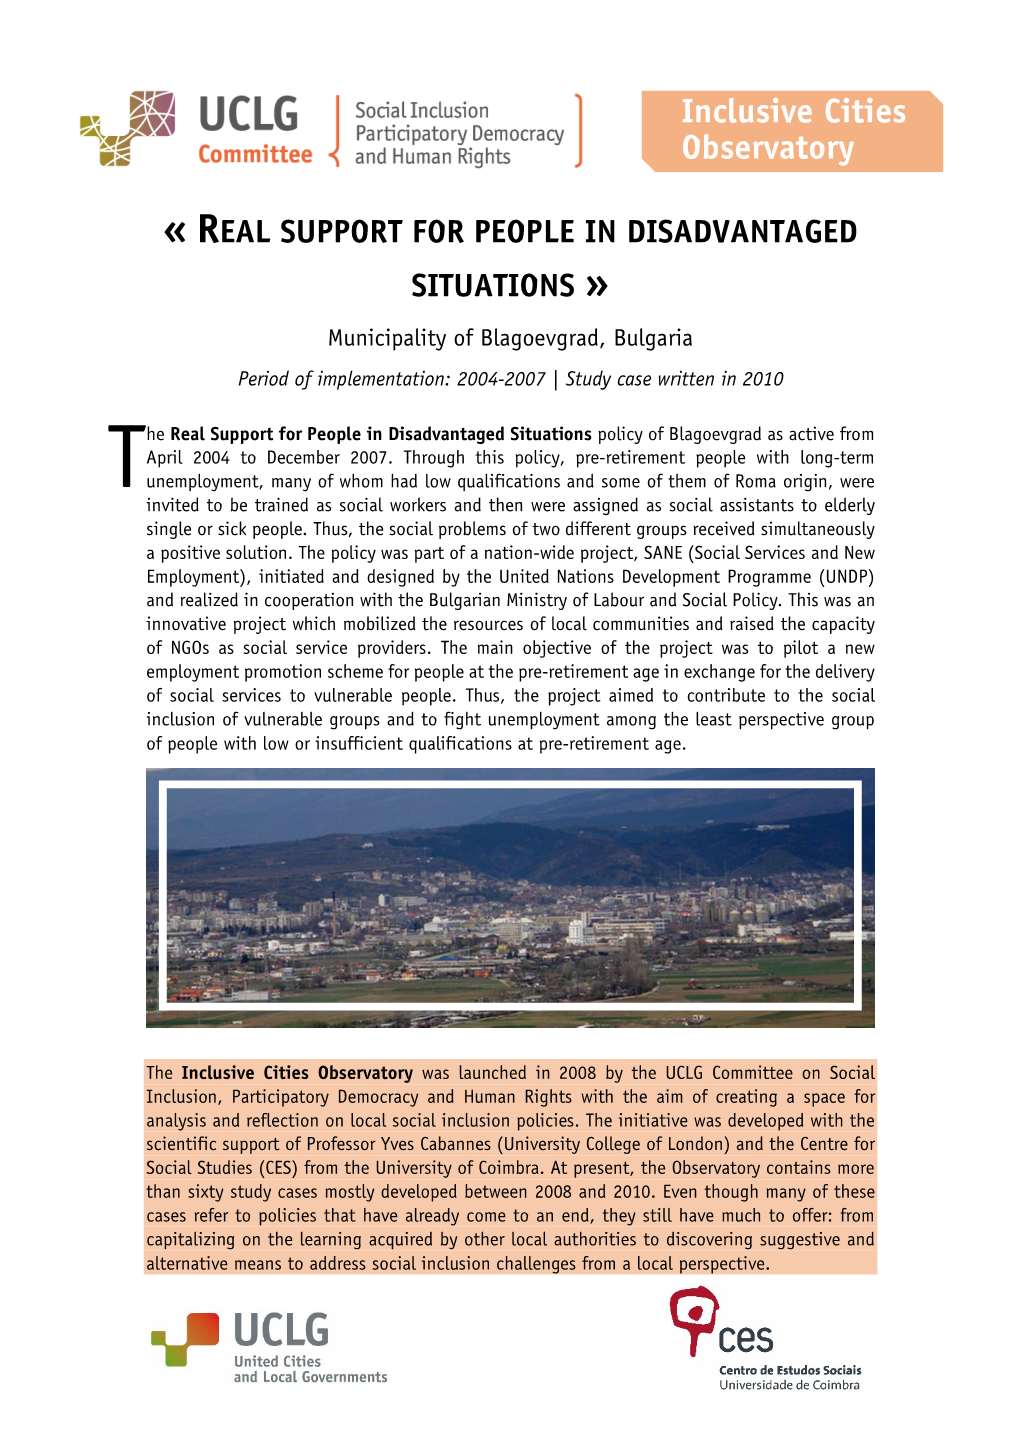 Real Support for People in Disadvantaged Situations: Long